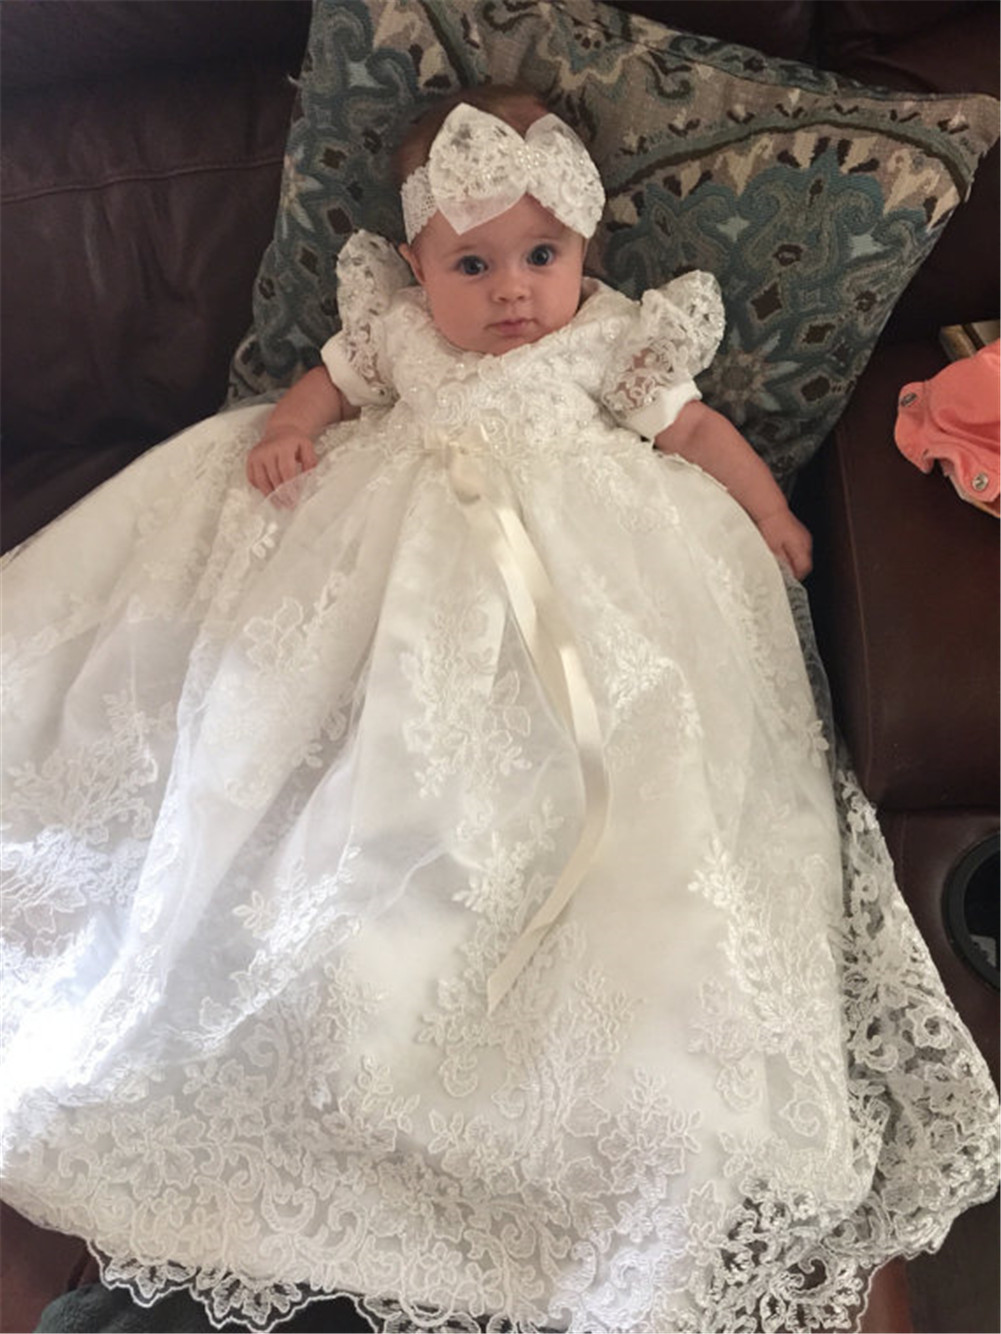 

Hot Sale Lace Christening Gowns For Baby Girls Short Sleeves Jewel Neck Ribbon Sash Baptism Dresses Custom Made First Communication Dress, Head bow price